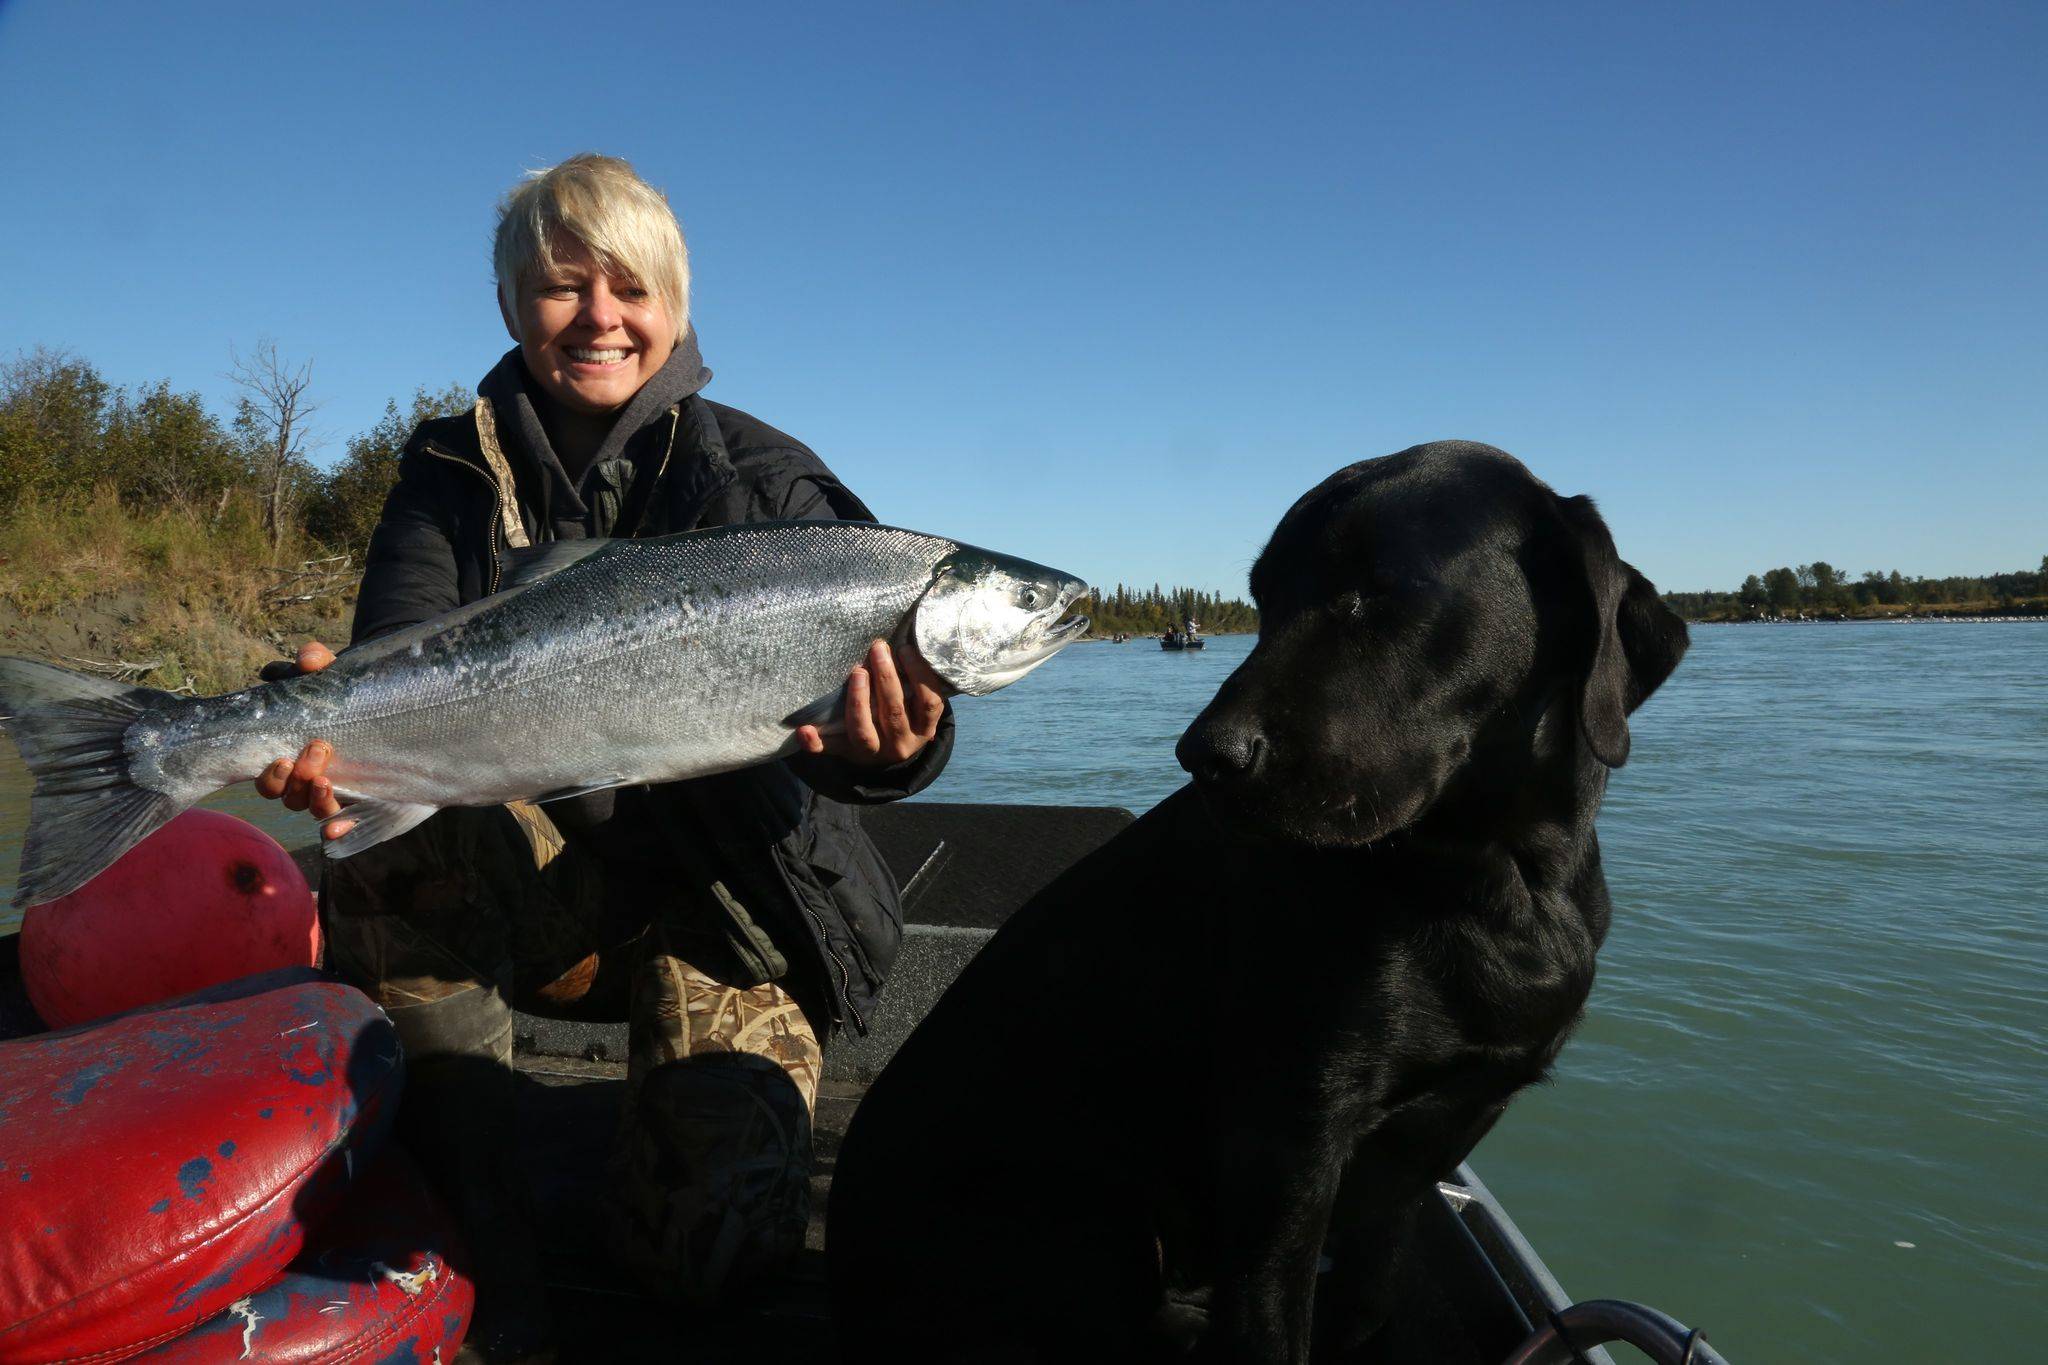 Christine Cunningham, Assistant to the Kenai City Manager, shows off a silver salmon she caught for the 4th annual Kenai Silver Salmon Derby in this undated photo. (Courtesy Christine Cunningham)